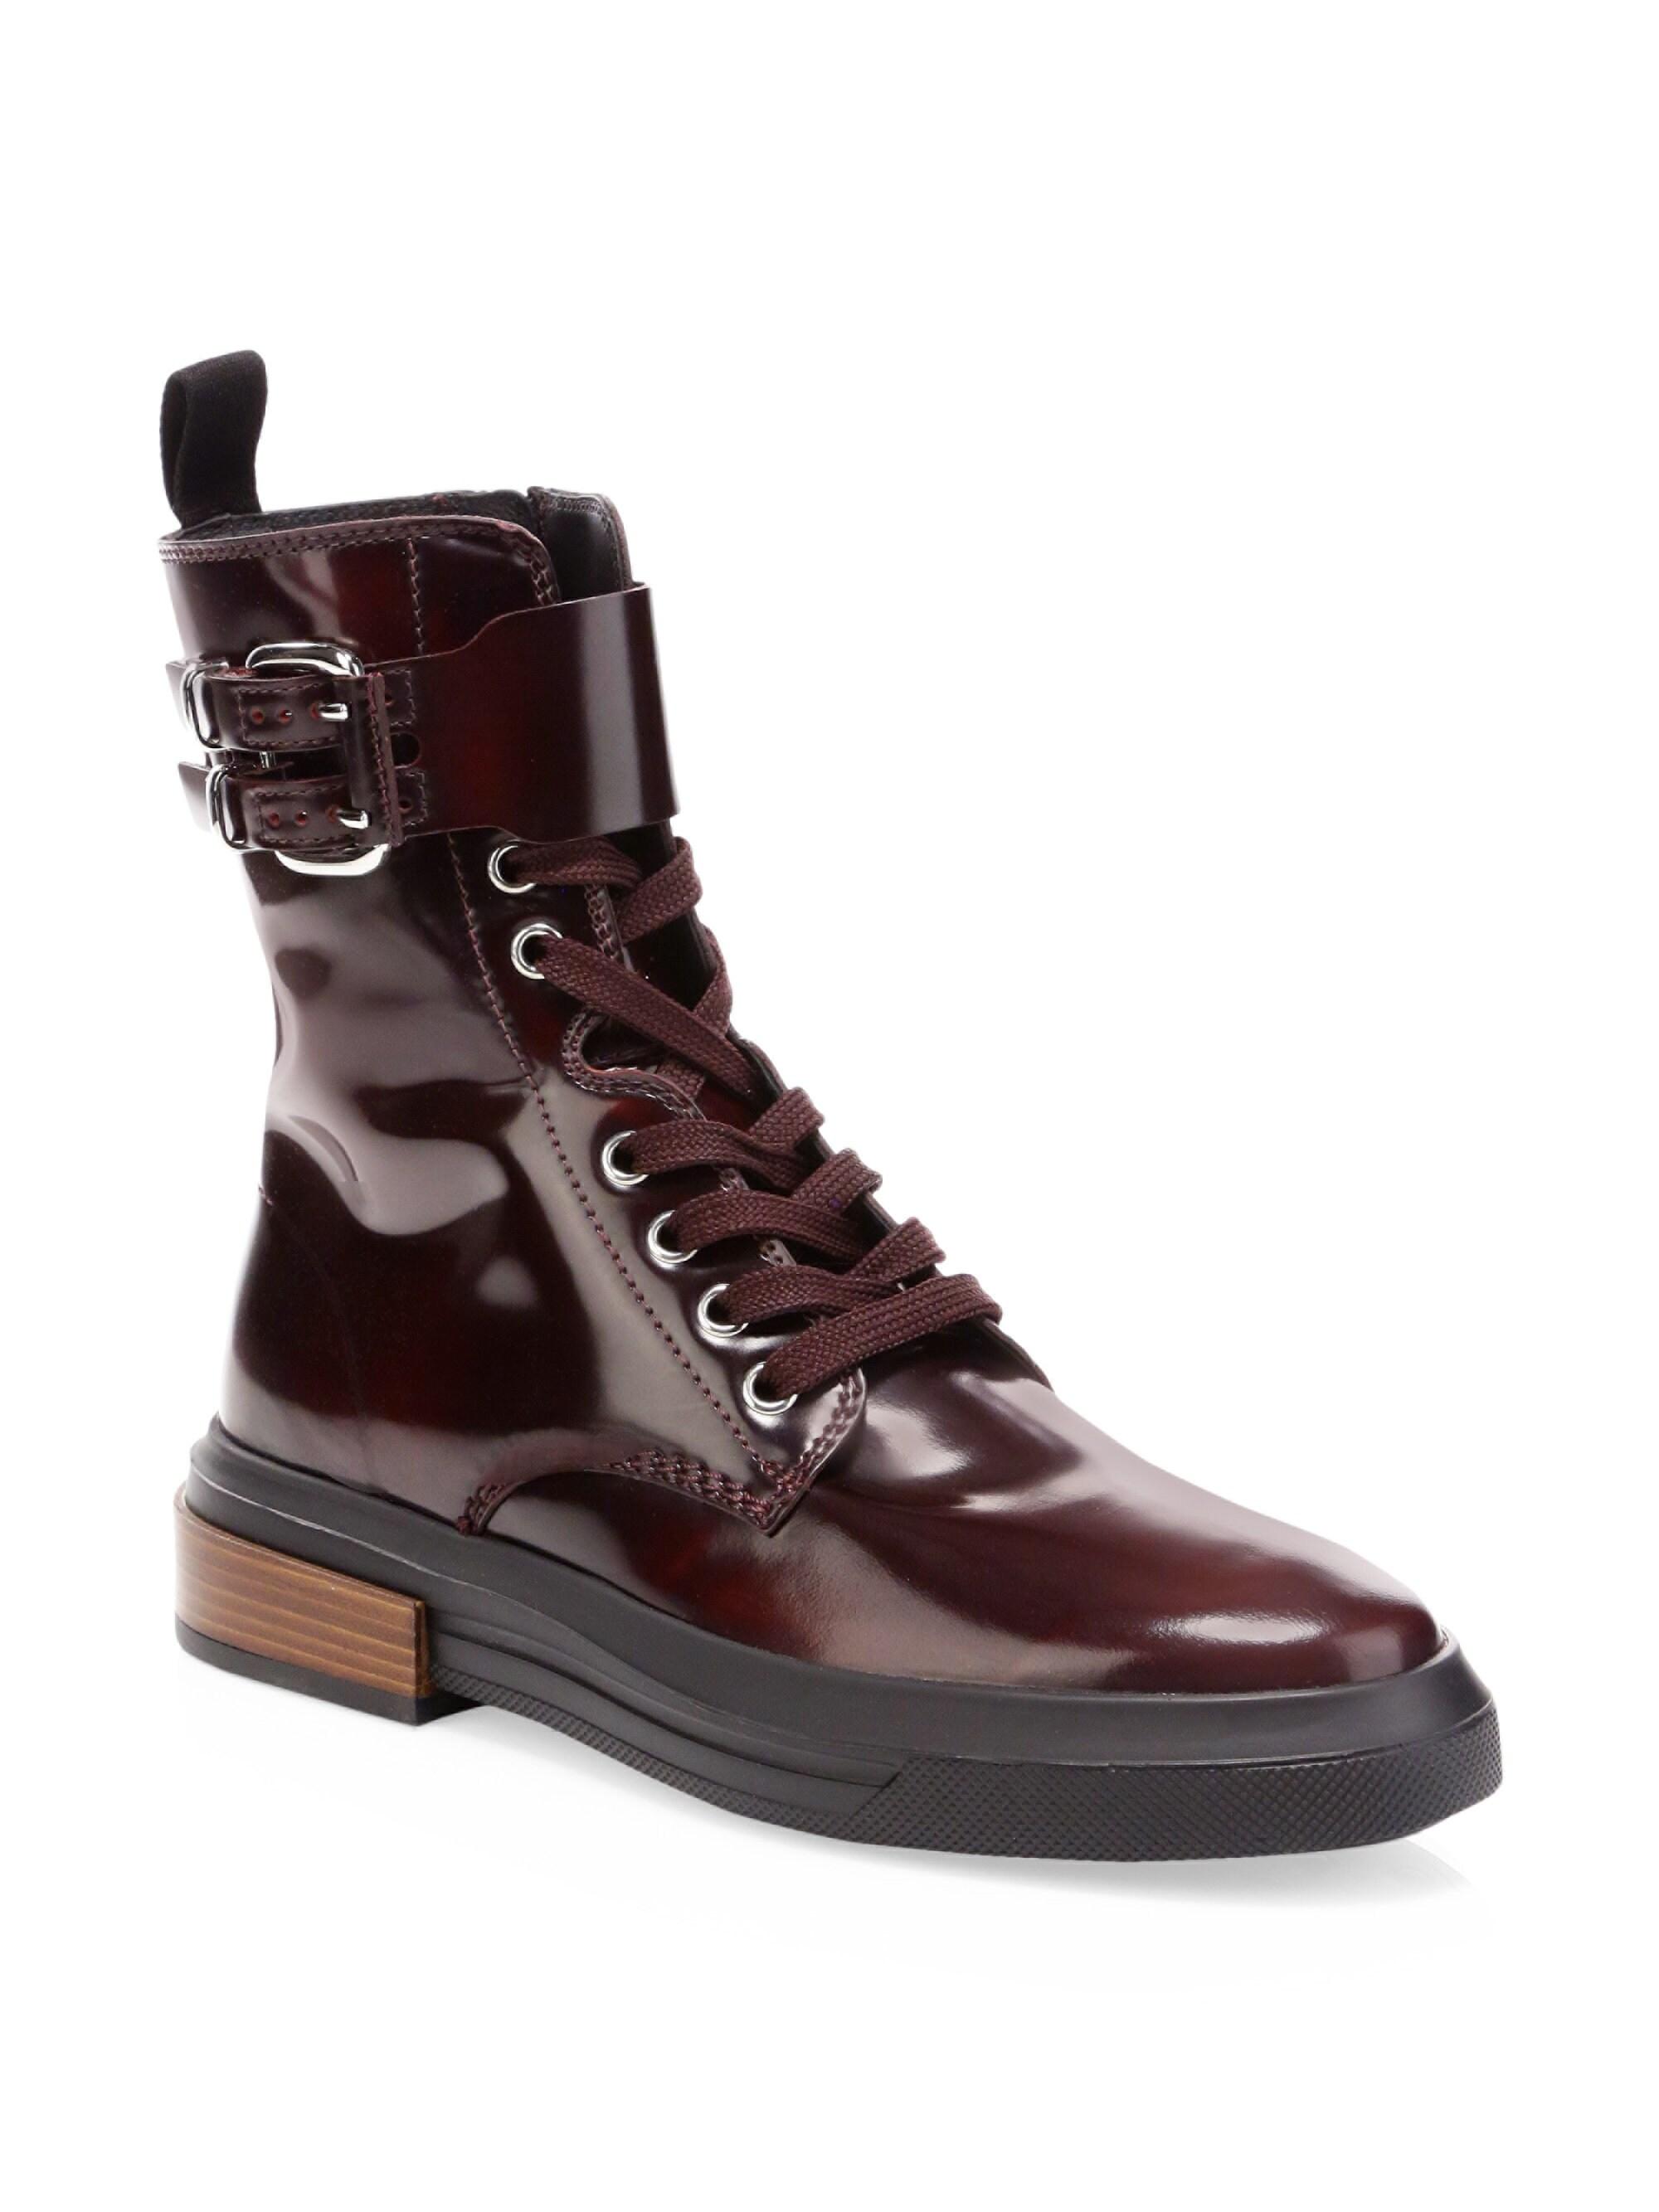 Deviation Rational suspension Tod's Women's Leather Combat Boots - Burgundy in Brown | Lyst